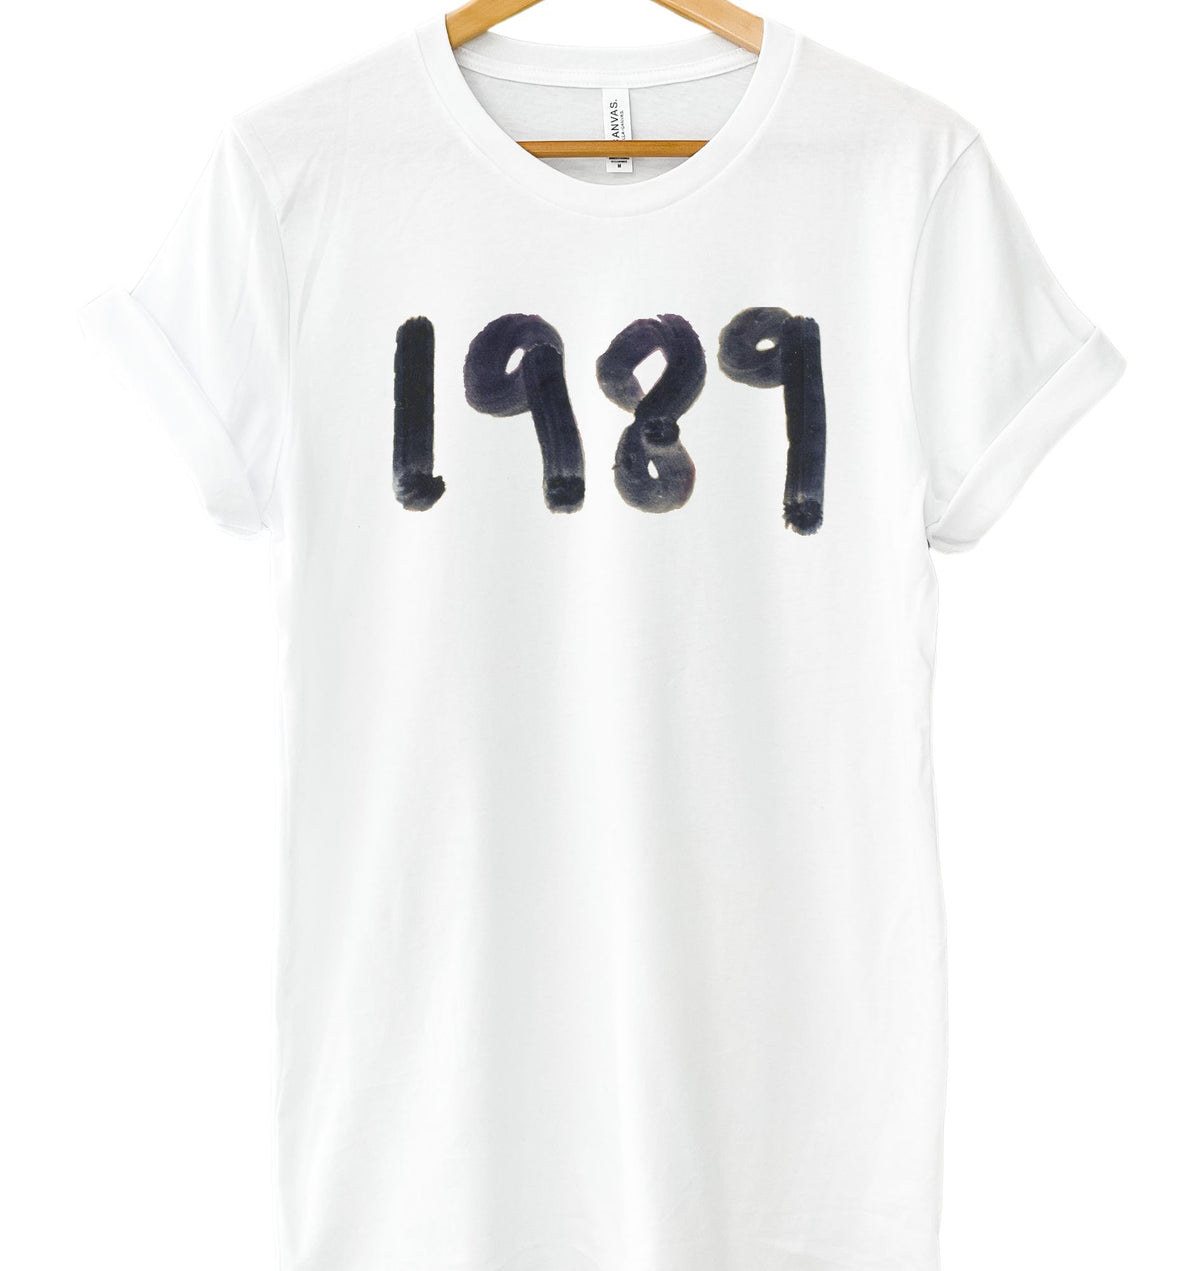 1989 T-Shirt | Adult + Youth